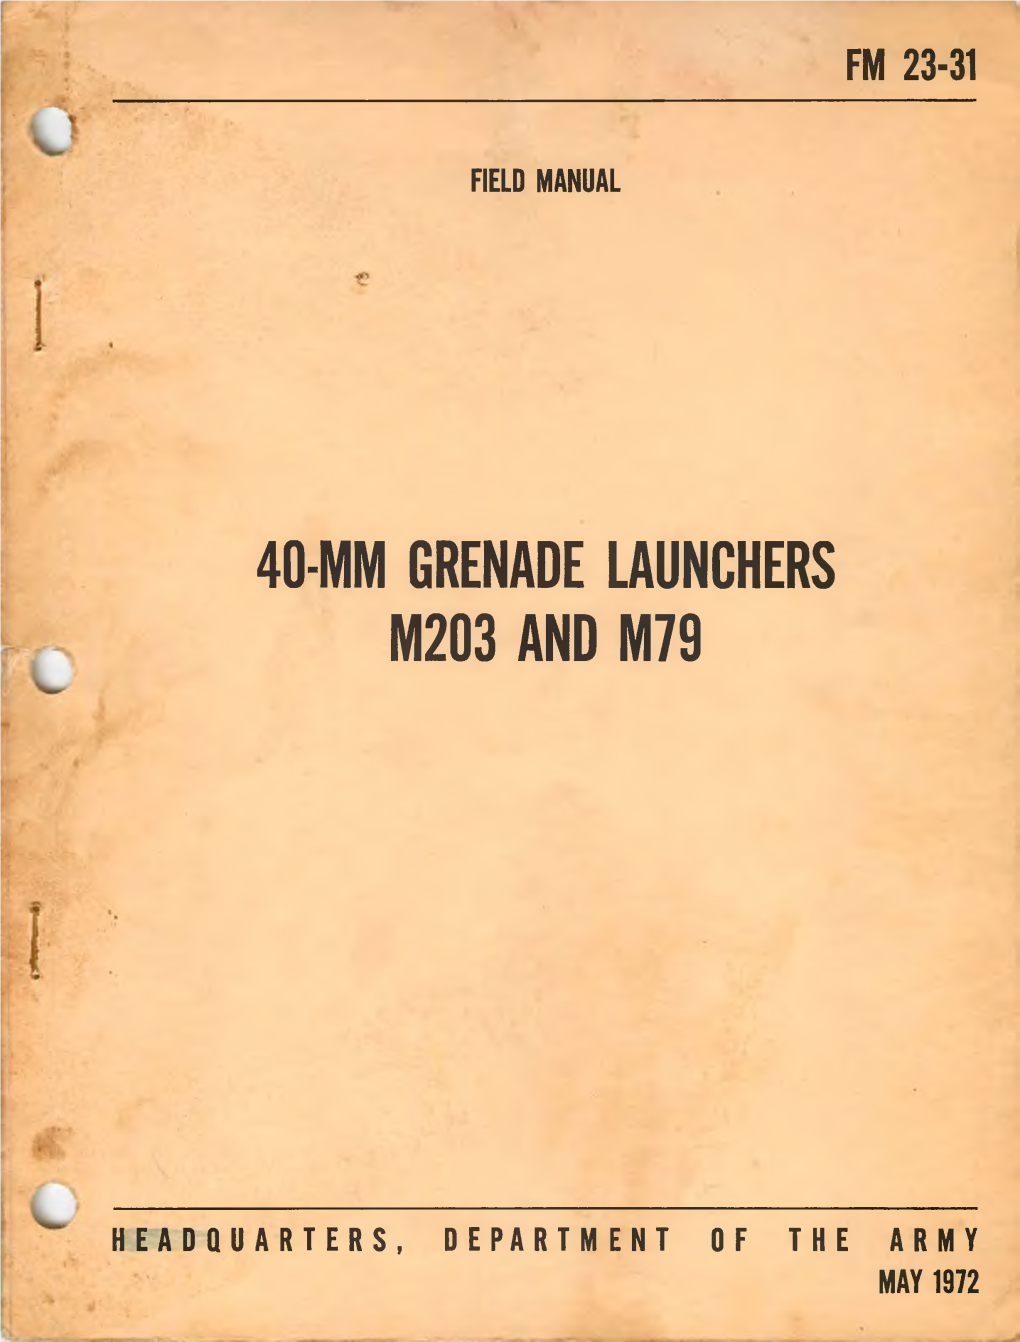 FM 23-31, 40Mm Grenade Launchers M203 And